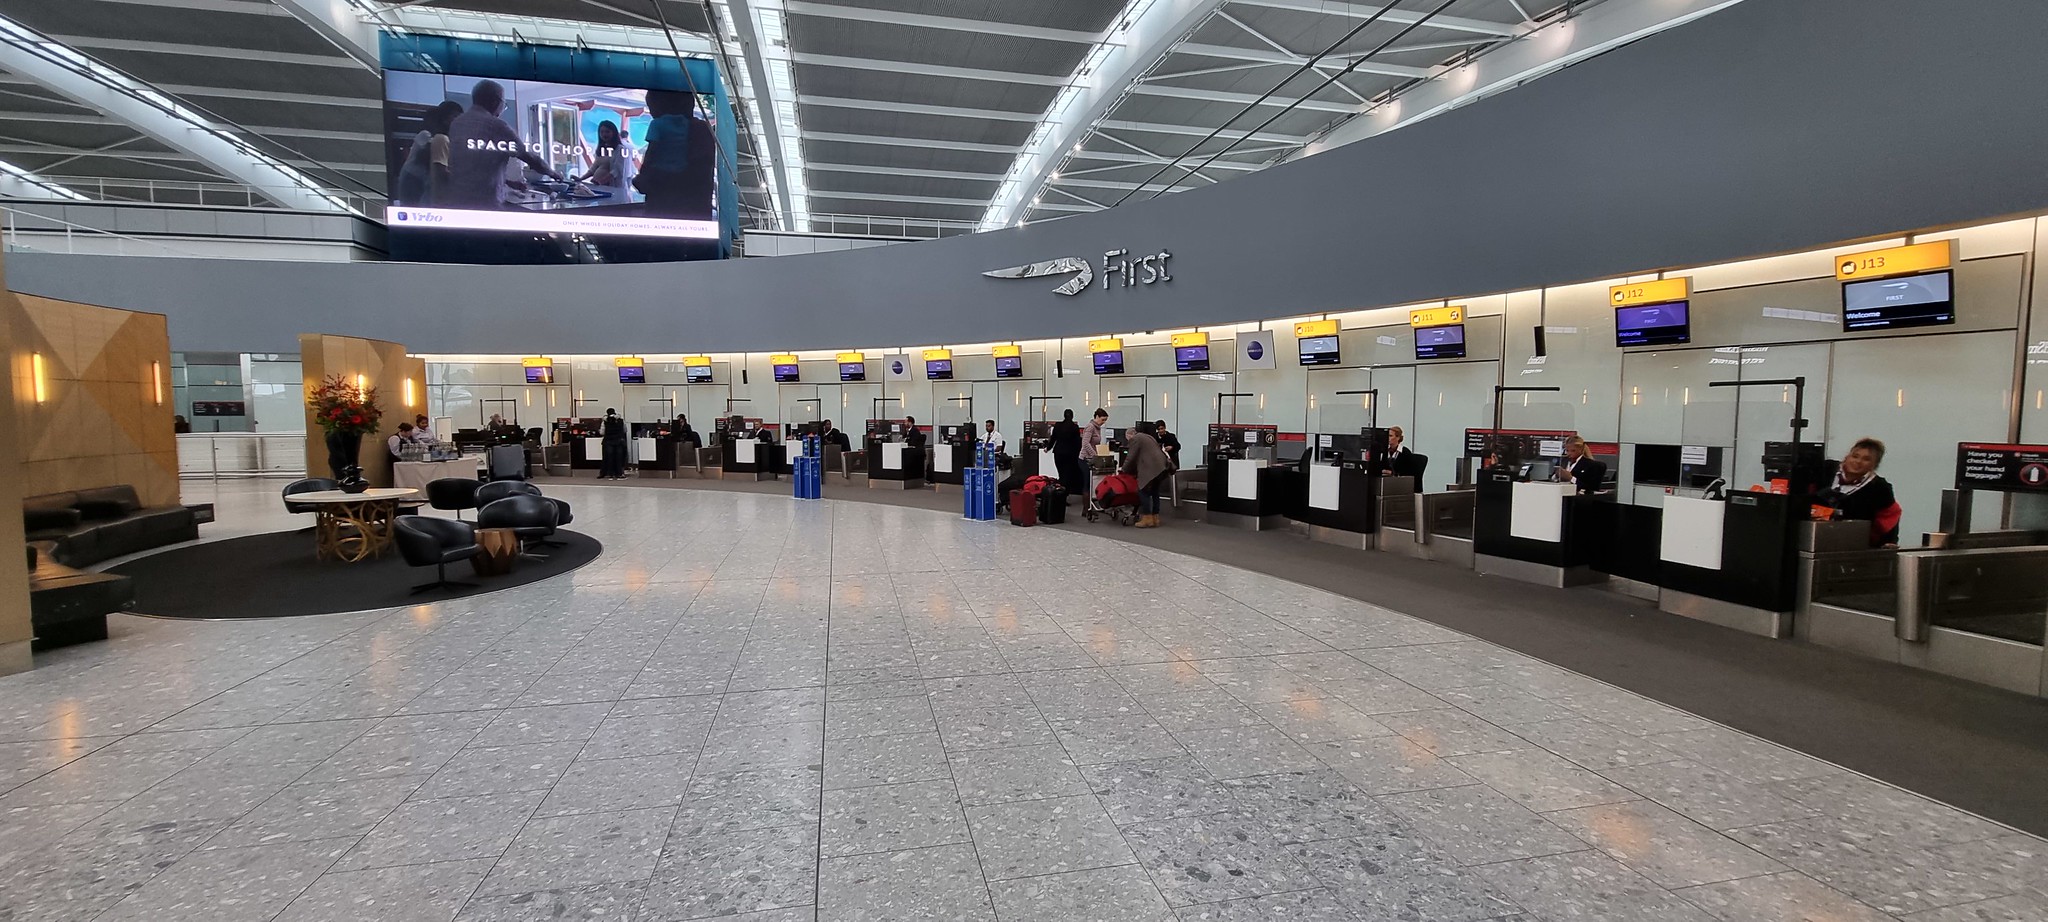 The BA First Wing check-in area at Heathrow T5